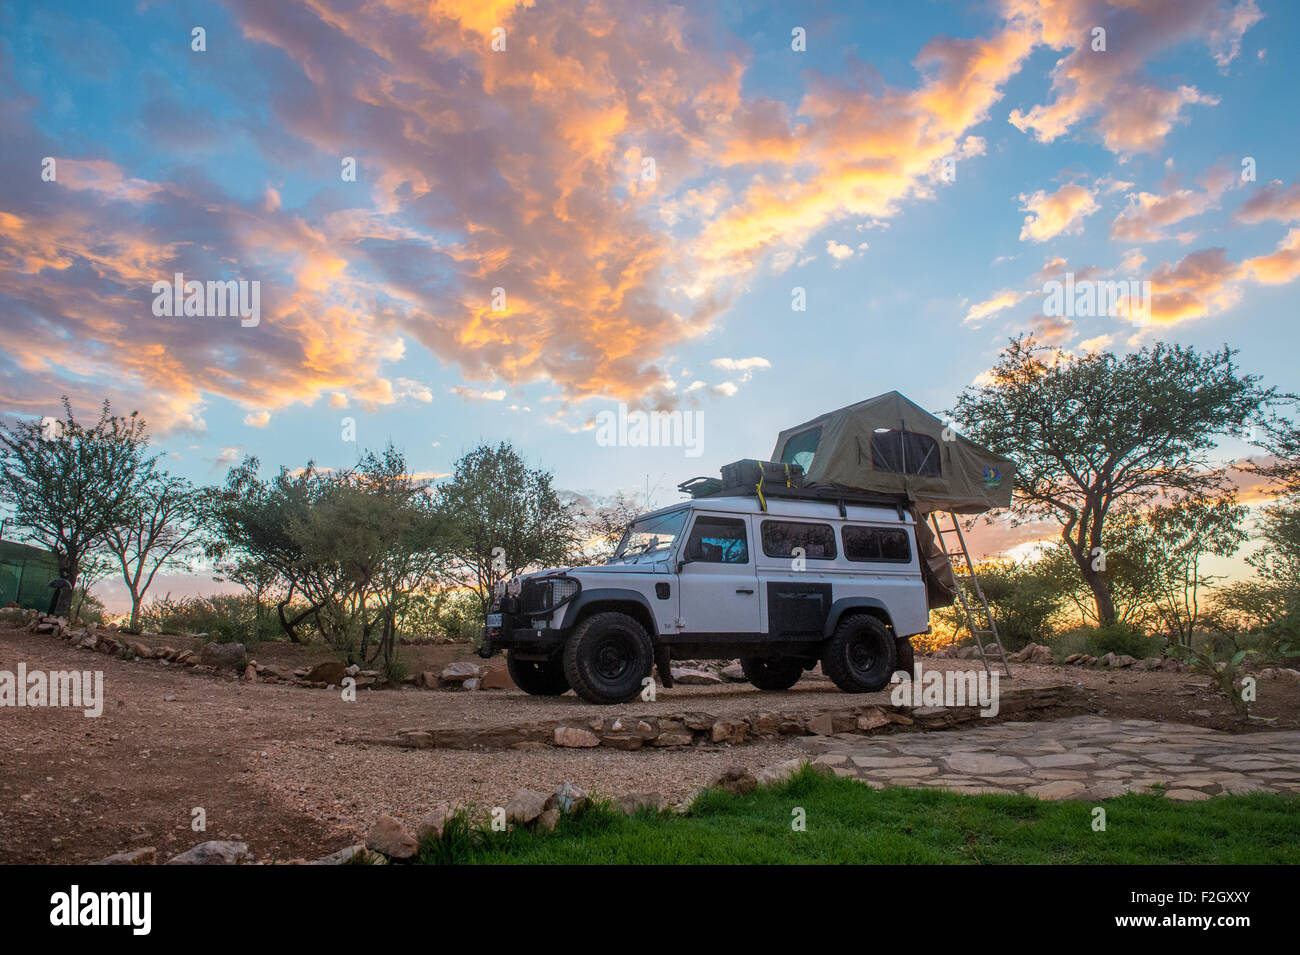 Land Rover parked and Camping in Botswana, Africa Stock Photo